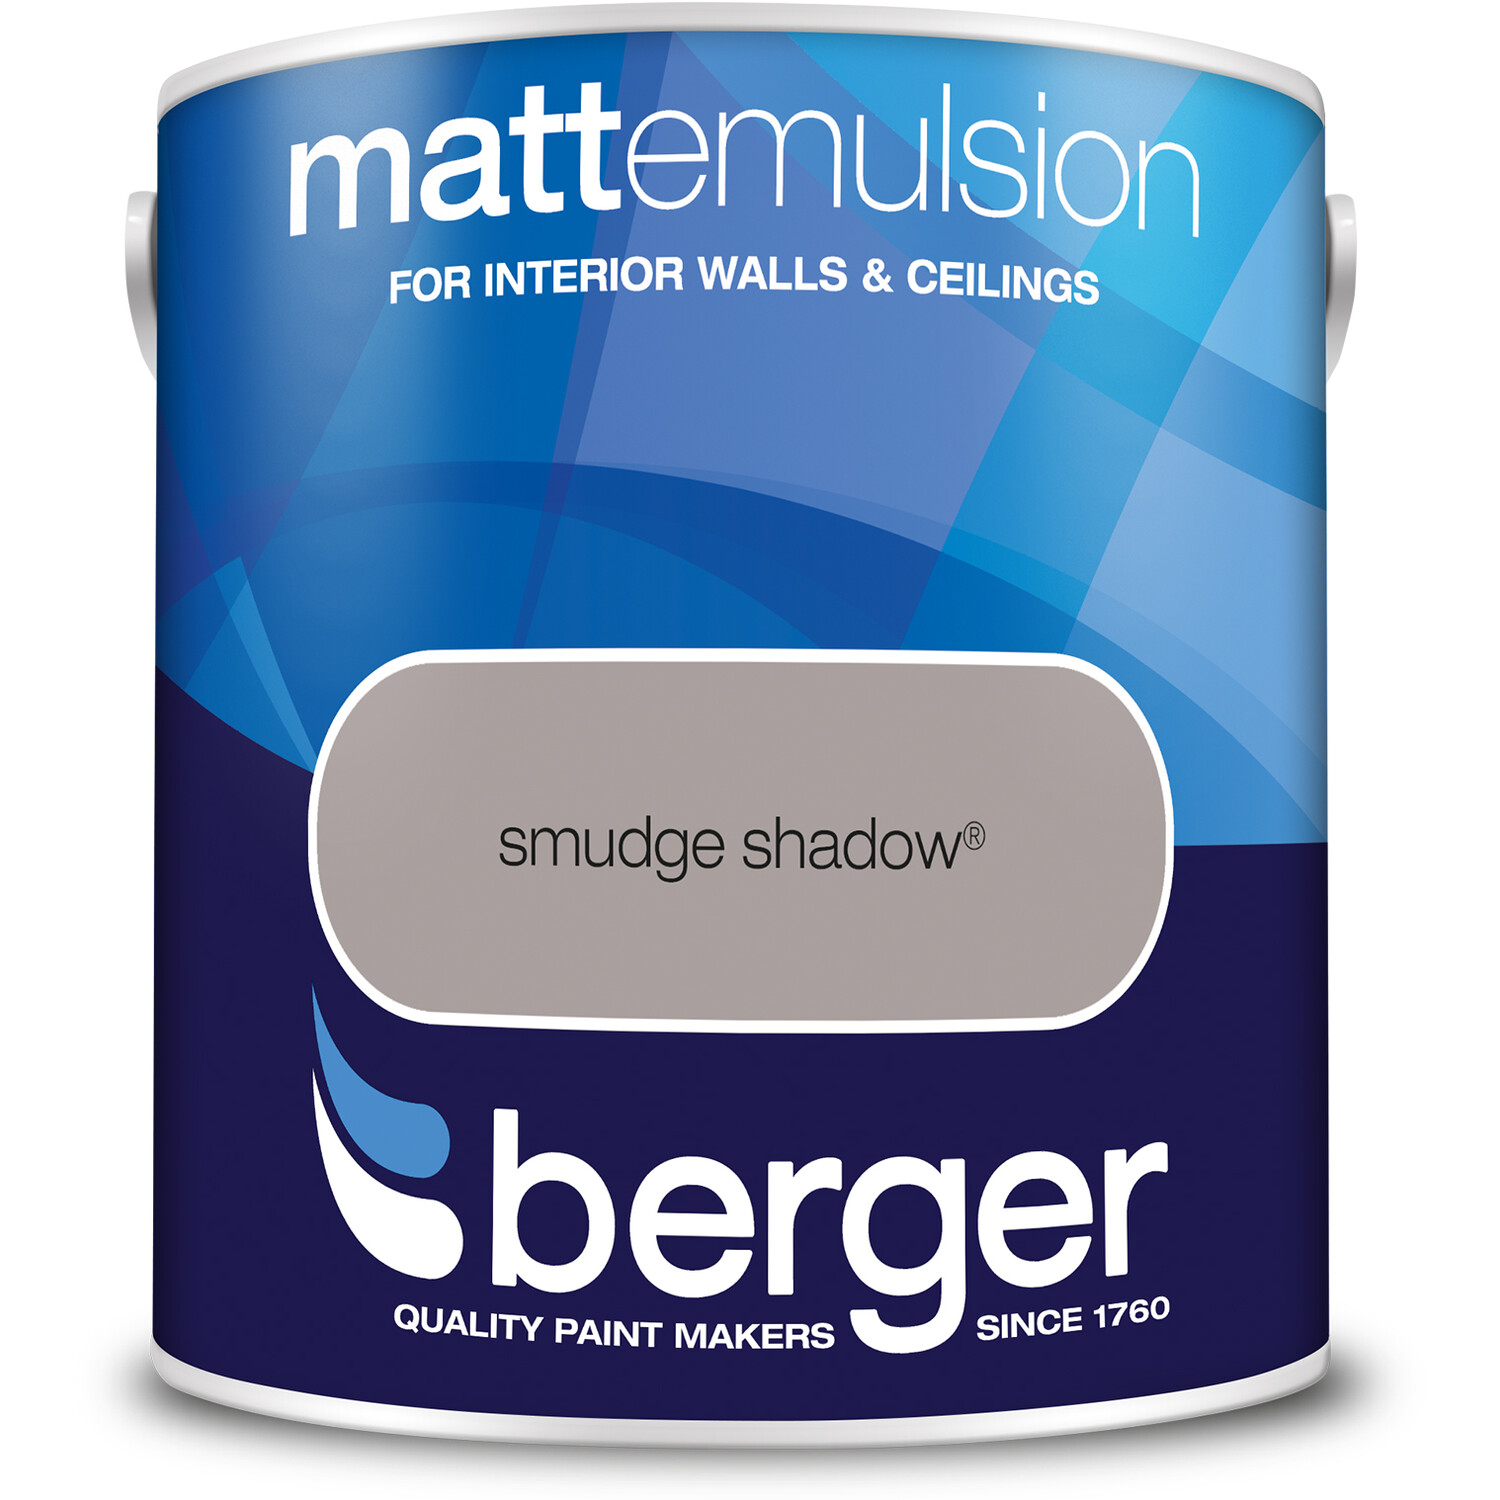 Berger Walls and Ceilings Smudge Shadow Matt Emulsion Paint 2.5L Image 2